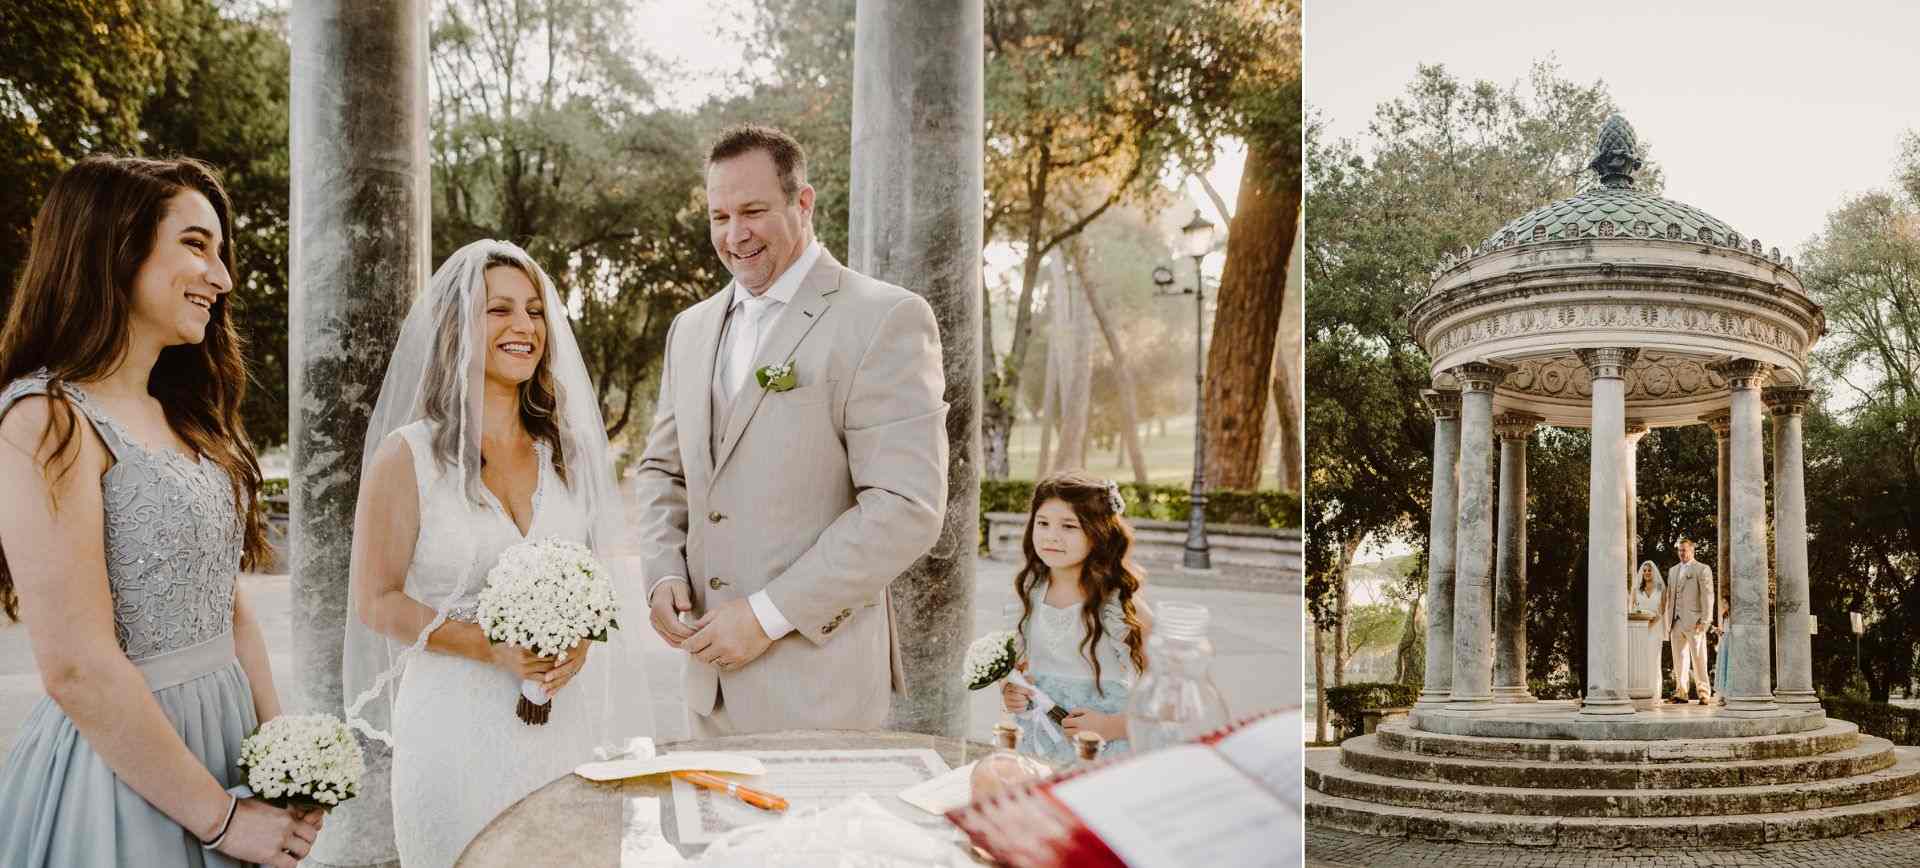 italy vow renewal - rome elopement package